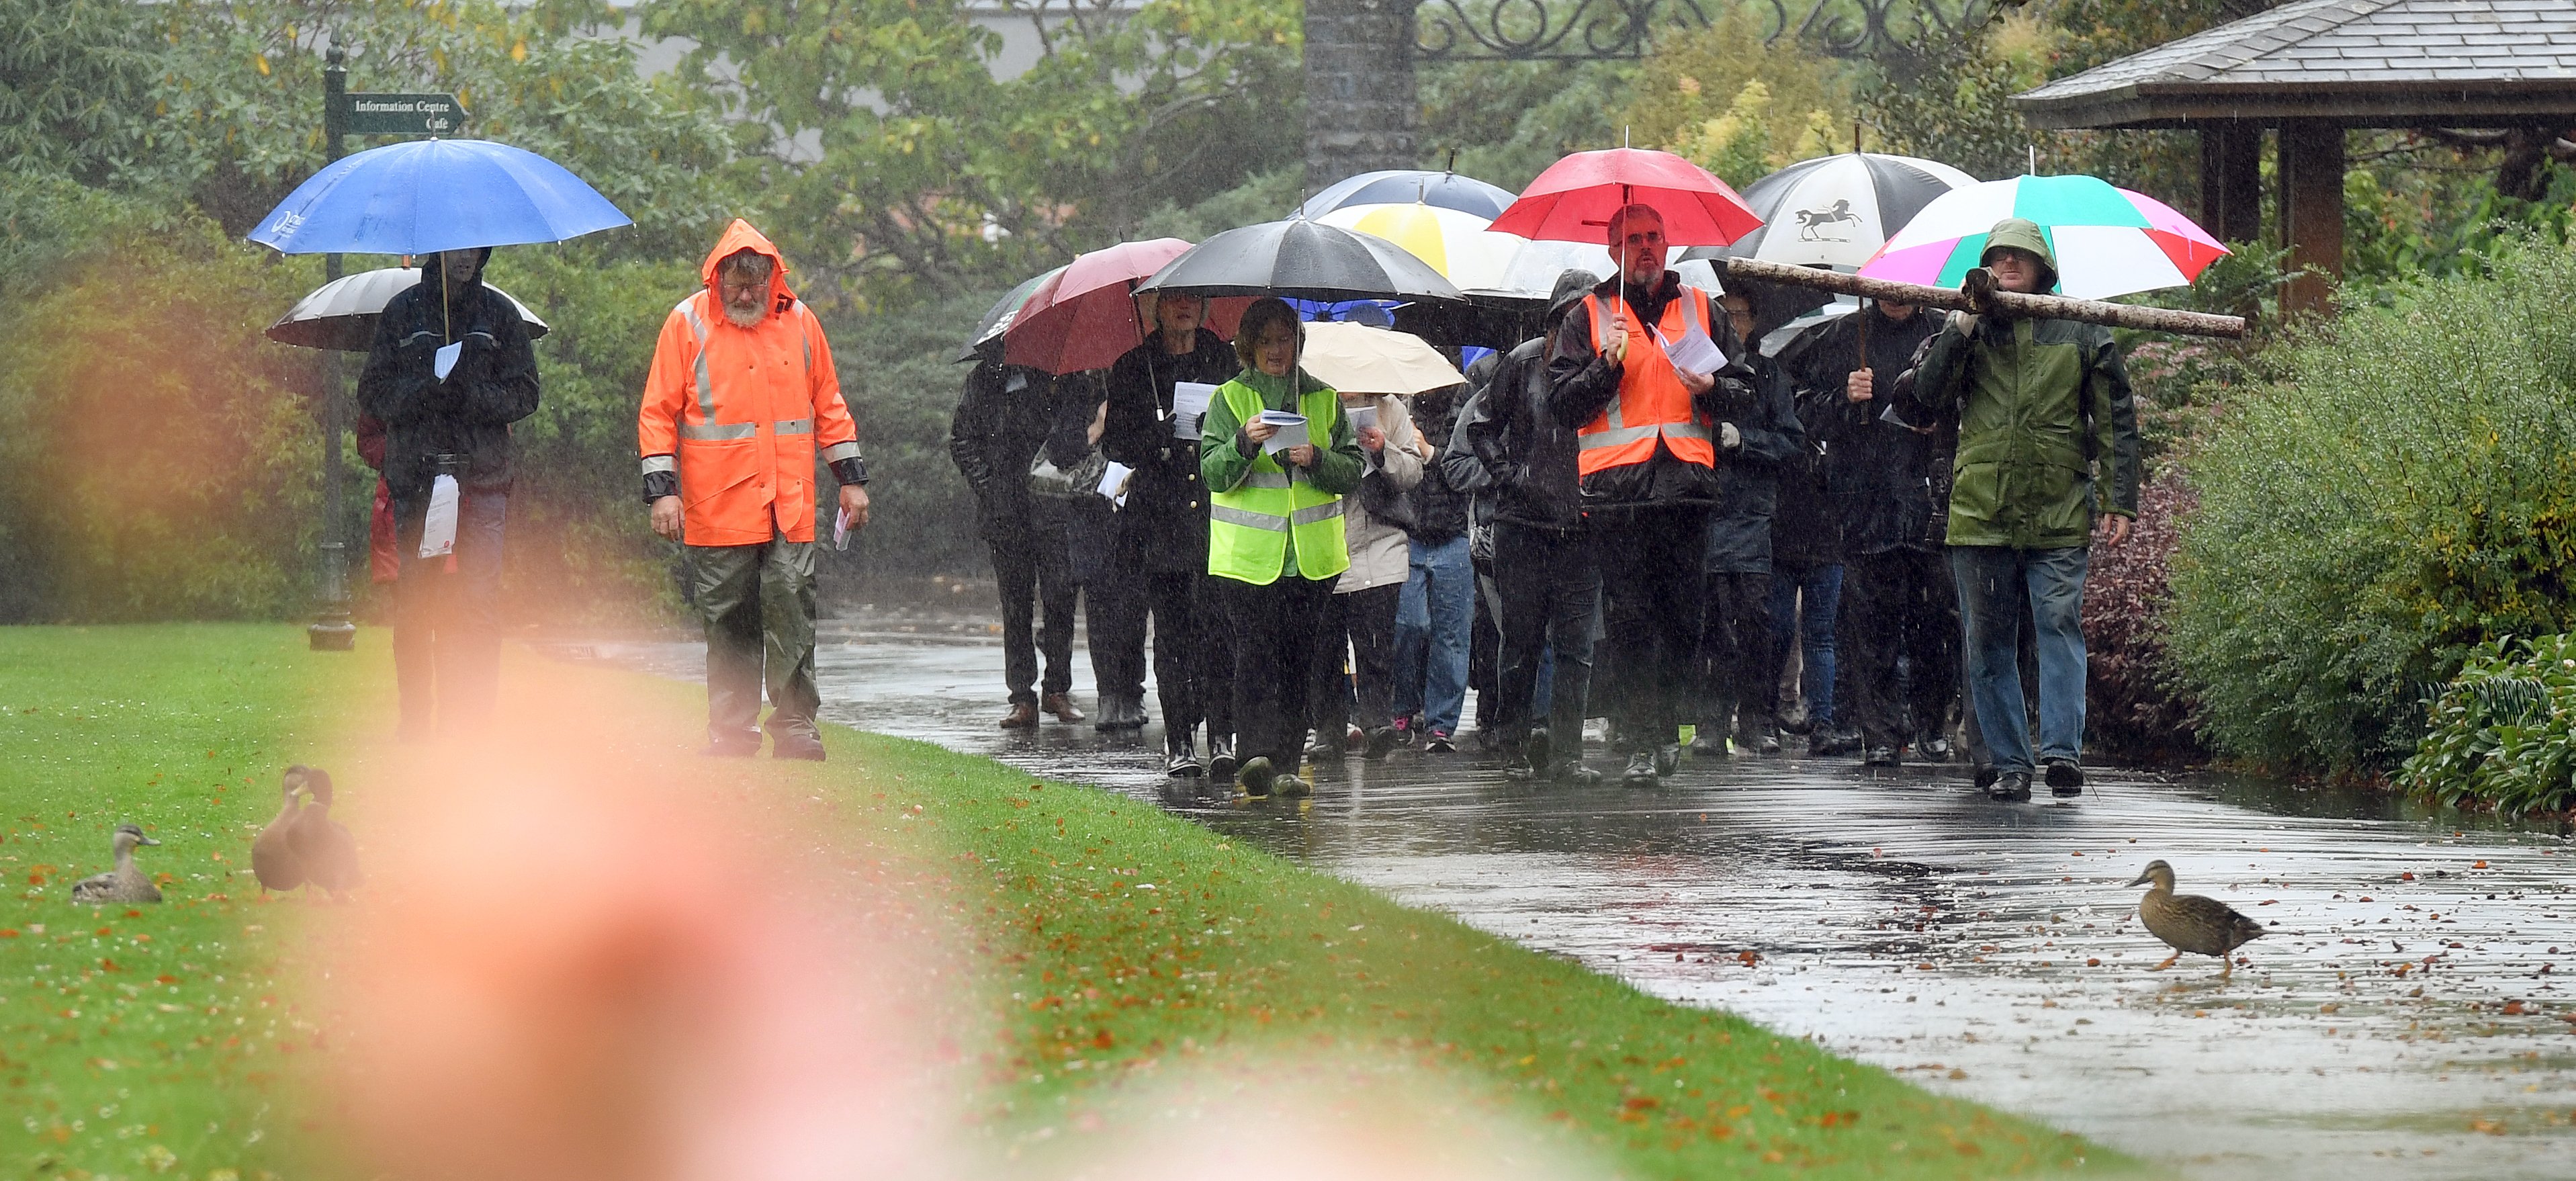 Steady rain did not dampen the spirits of the about 40 Northeast Valley church-goers who marked...